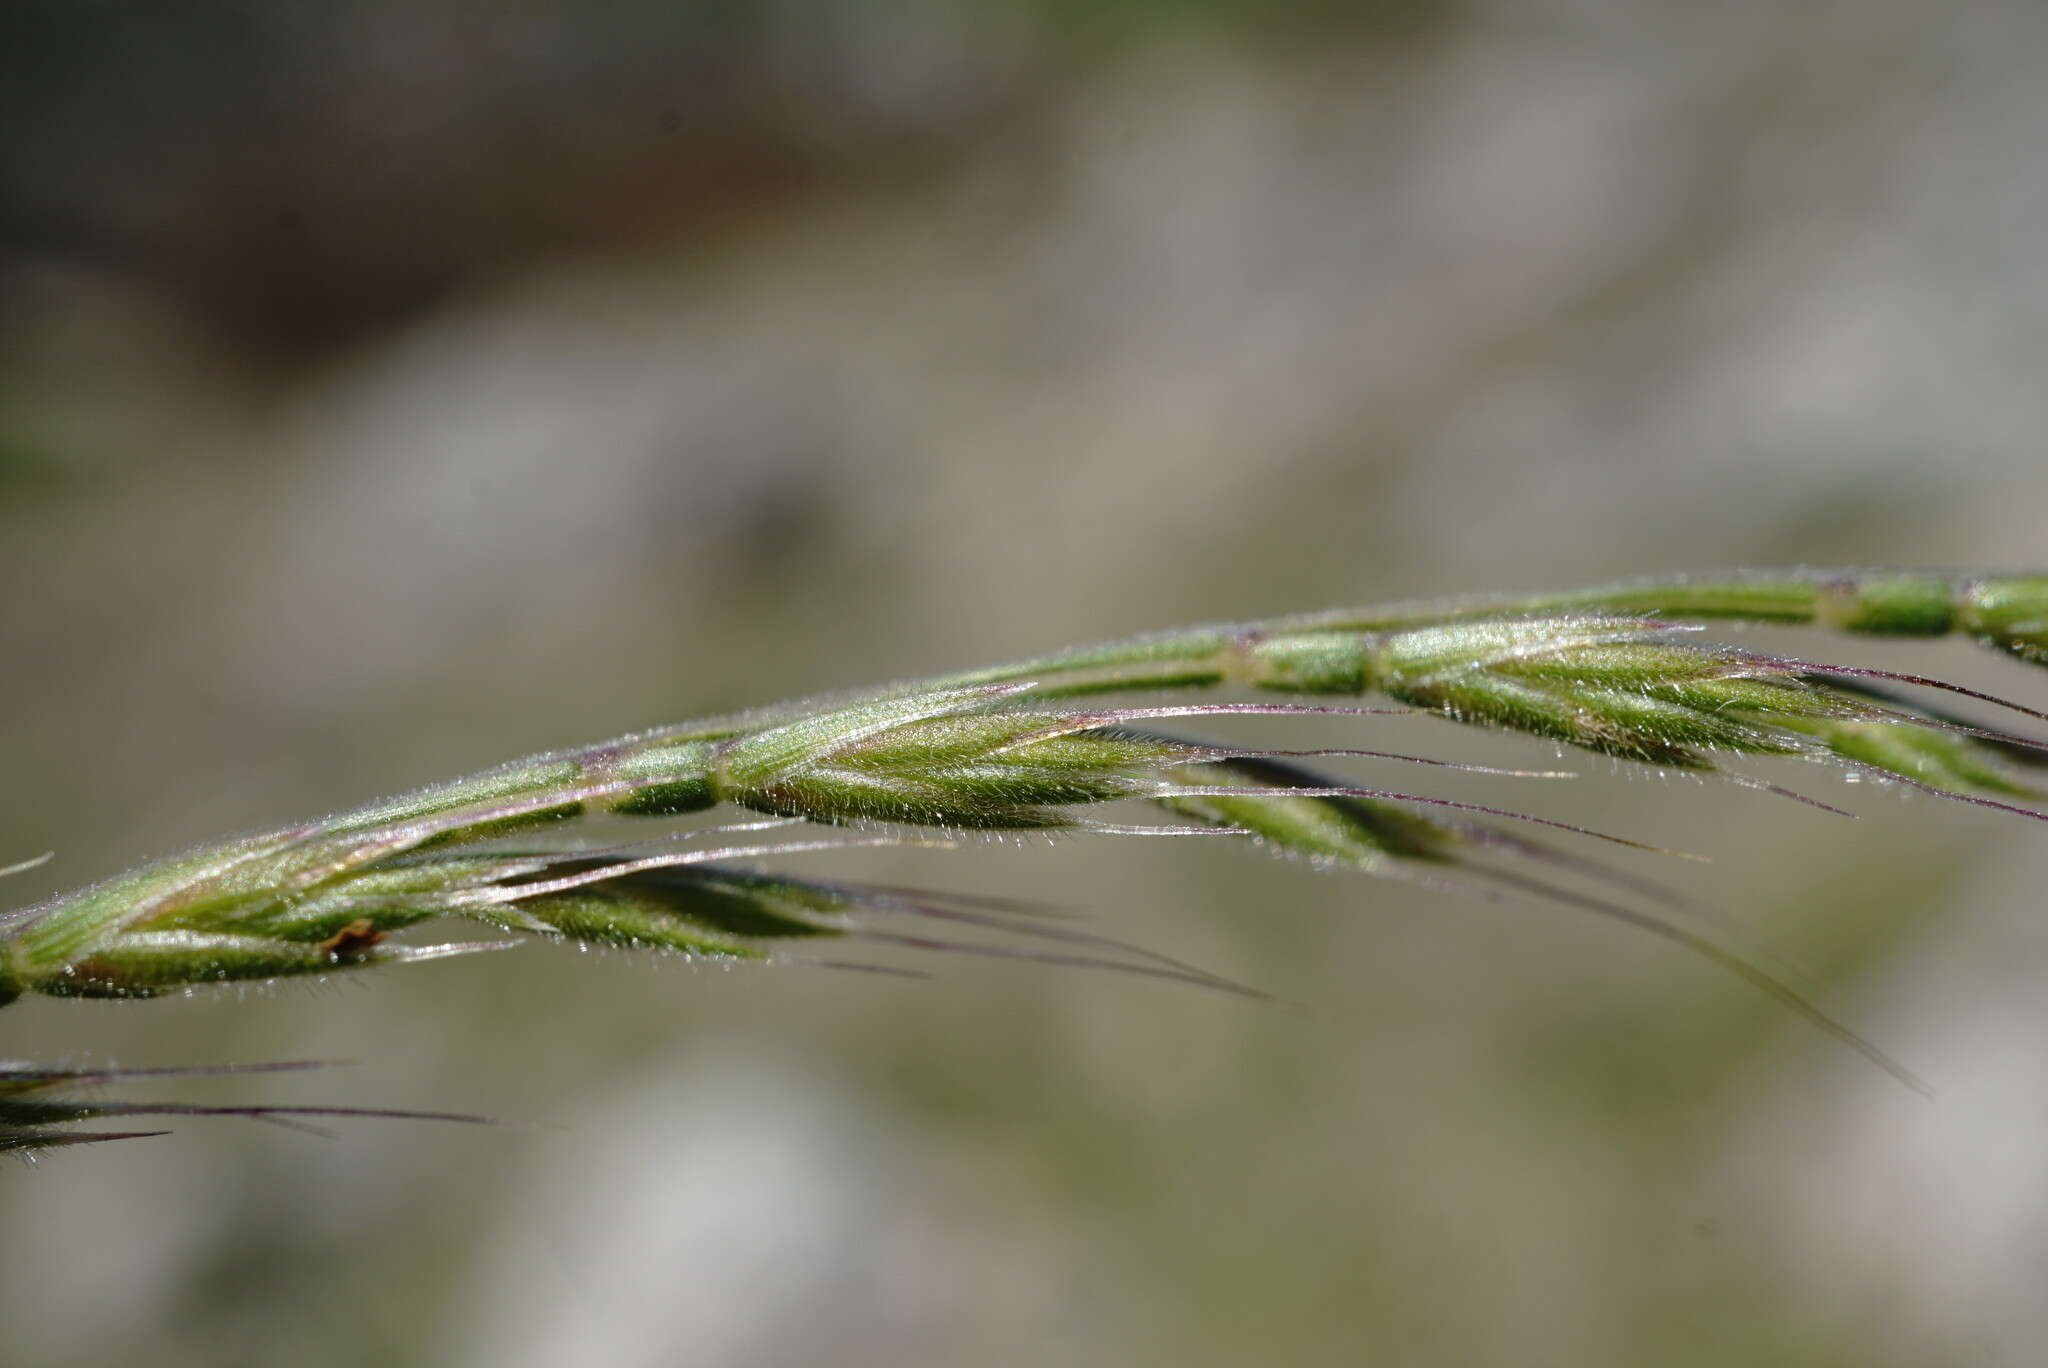 Image of mat-grass fescue